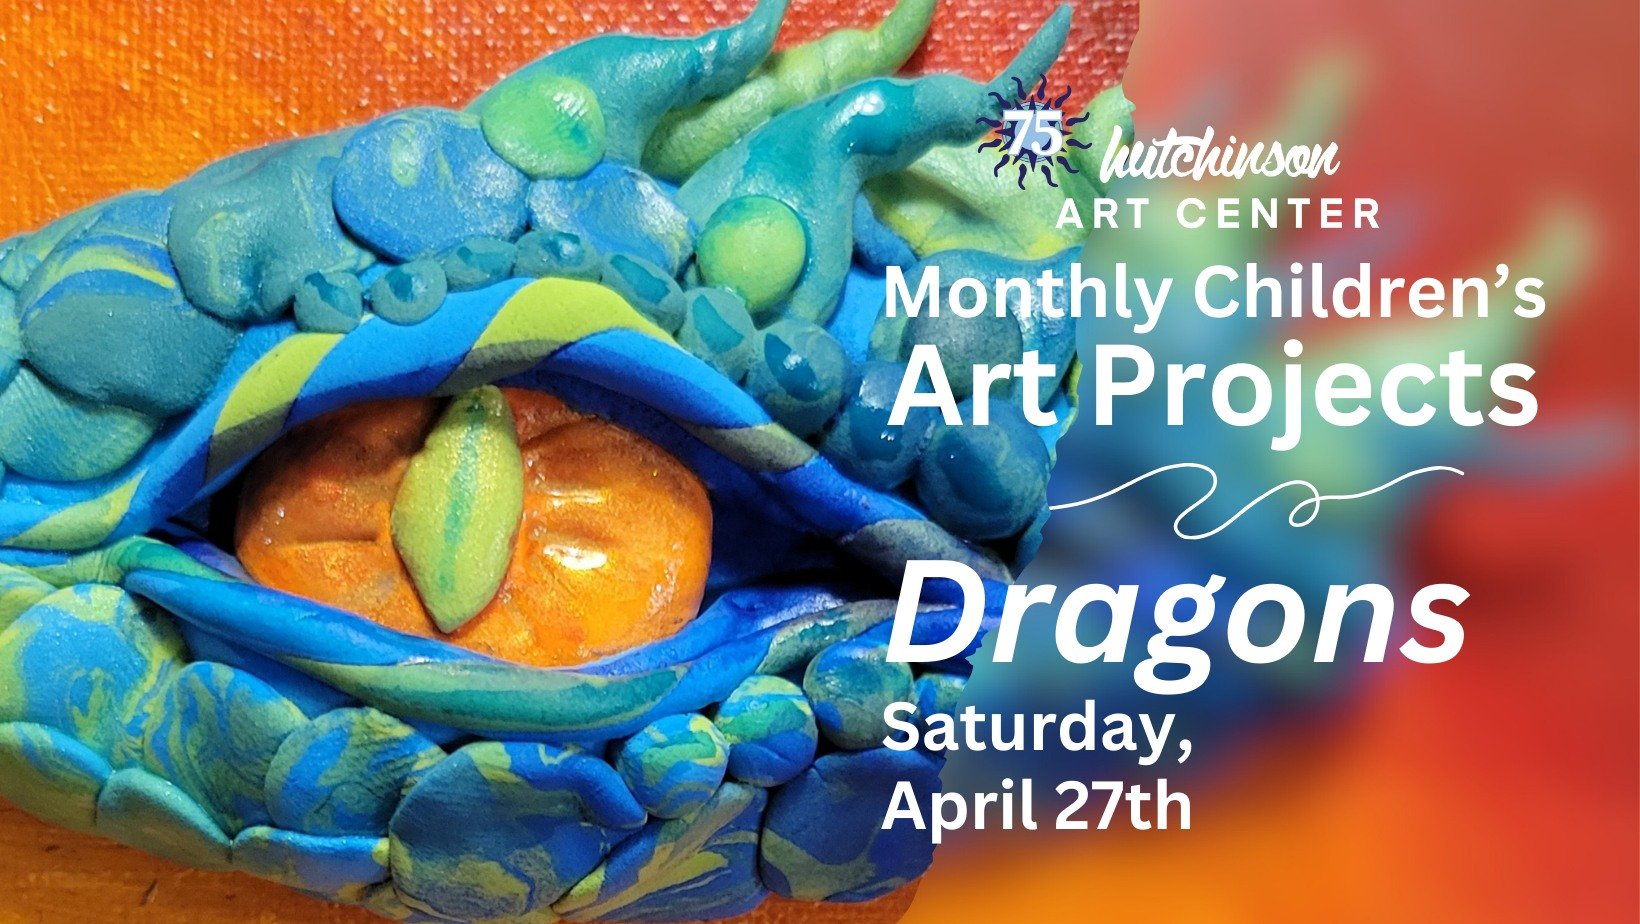 This is your ✨LAST CHANCE✨ to sign up your child to join us at the Hutchinson Art Center for this month&rsquo;s make-and-take art projects for children on April 27th at the Hutchinson Art Center. This is an opportunity for children aged 6 through 12 